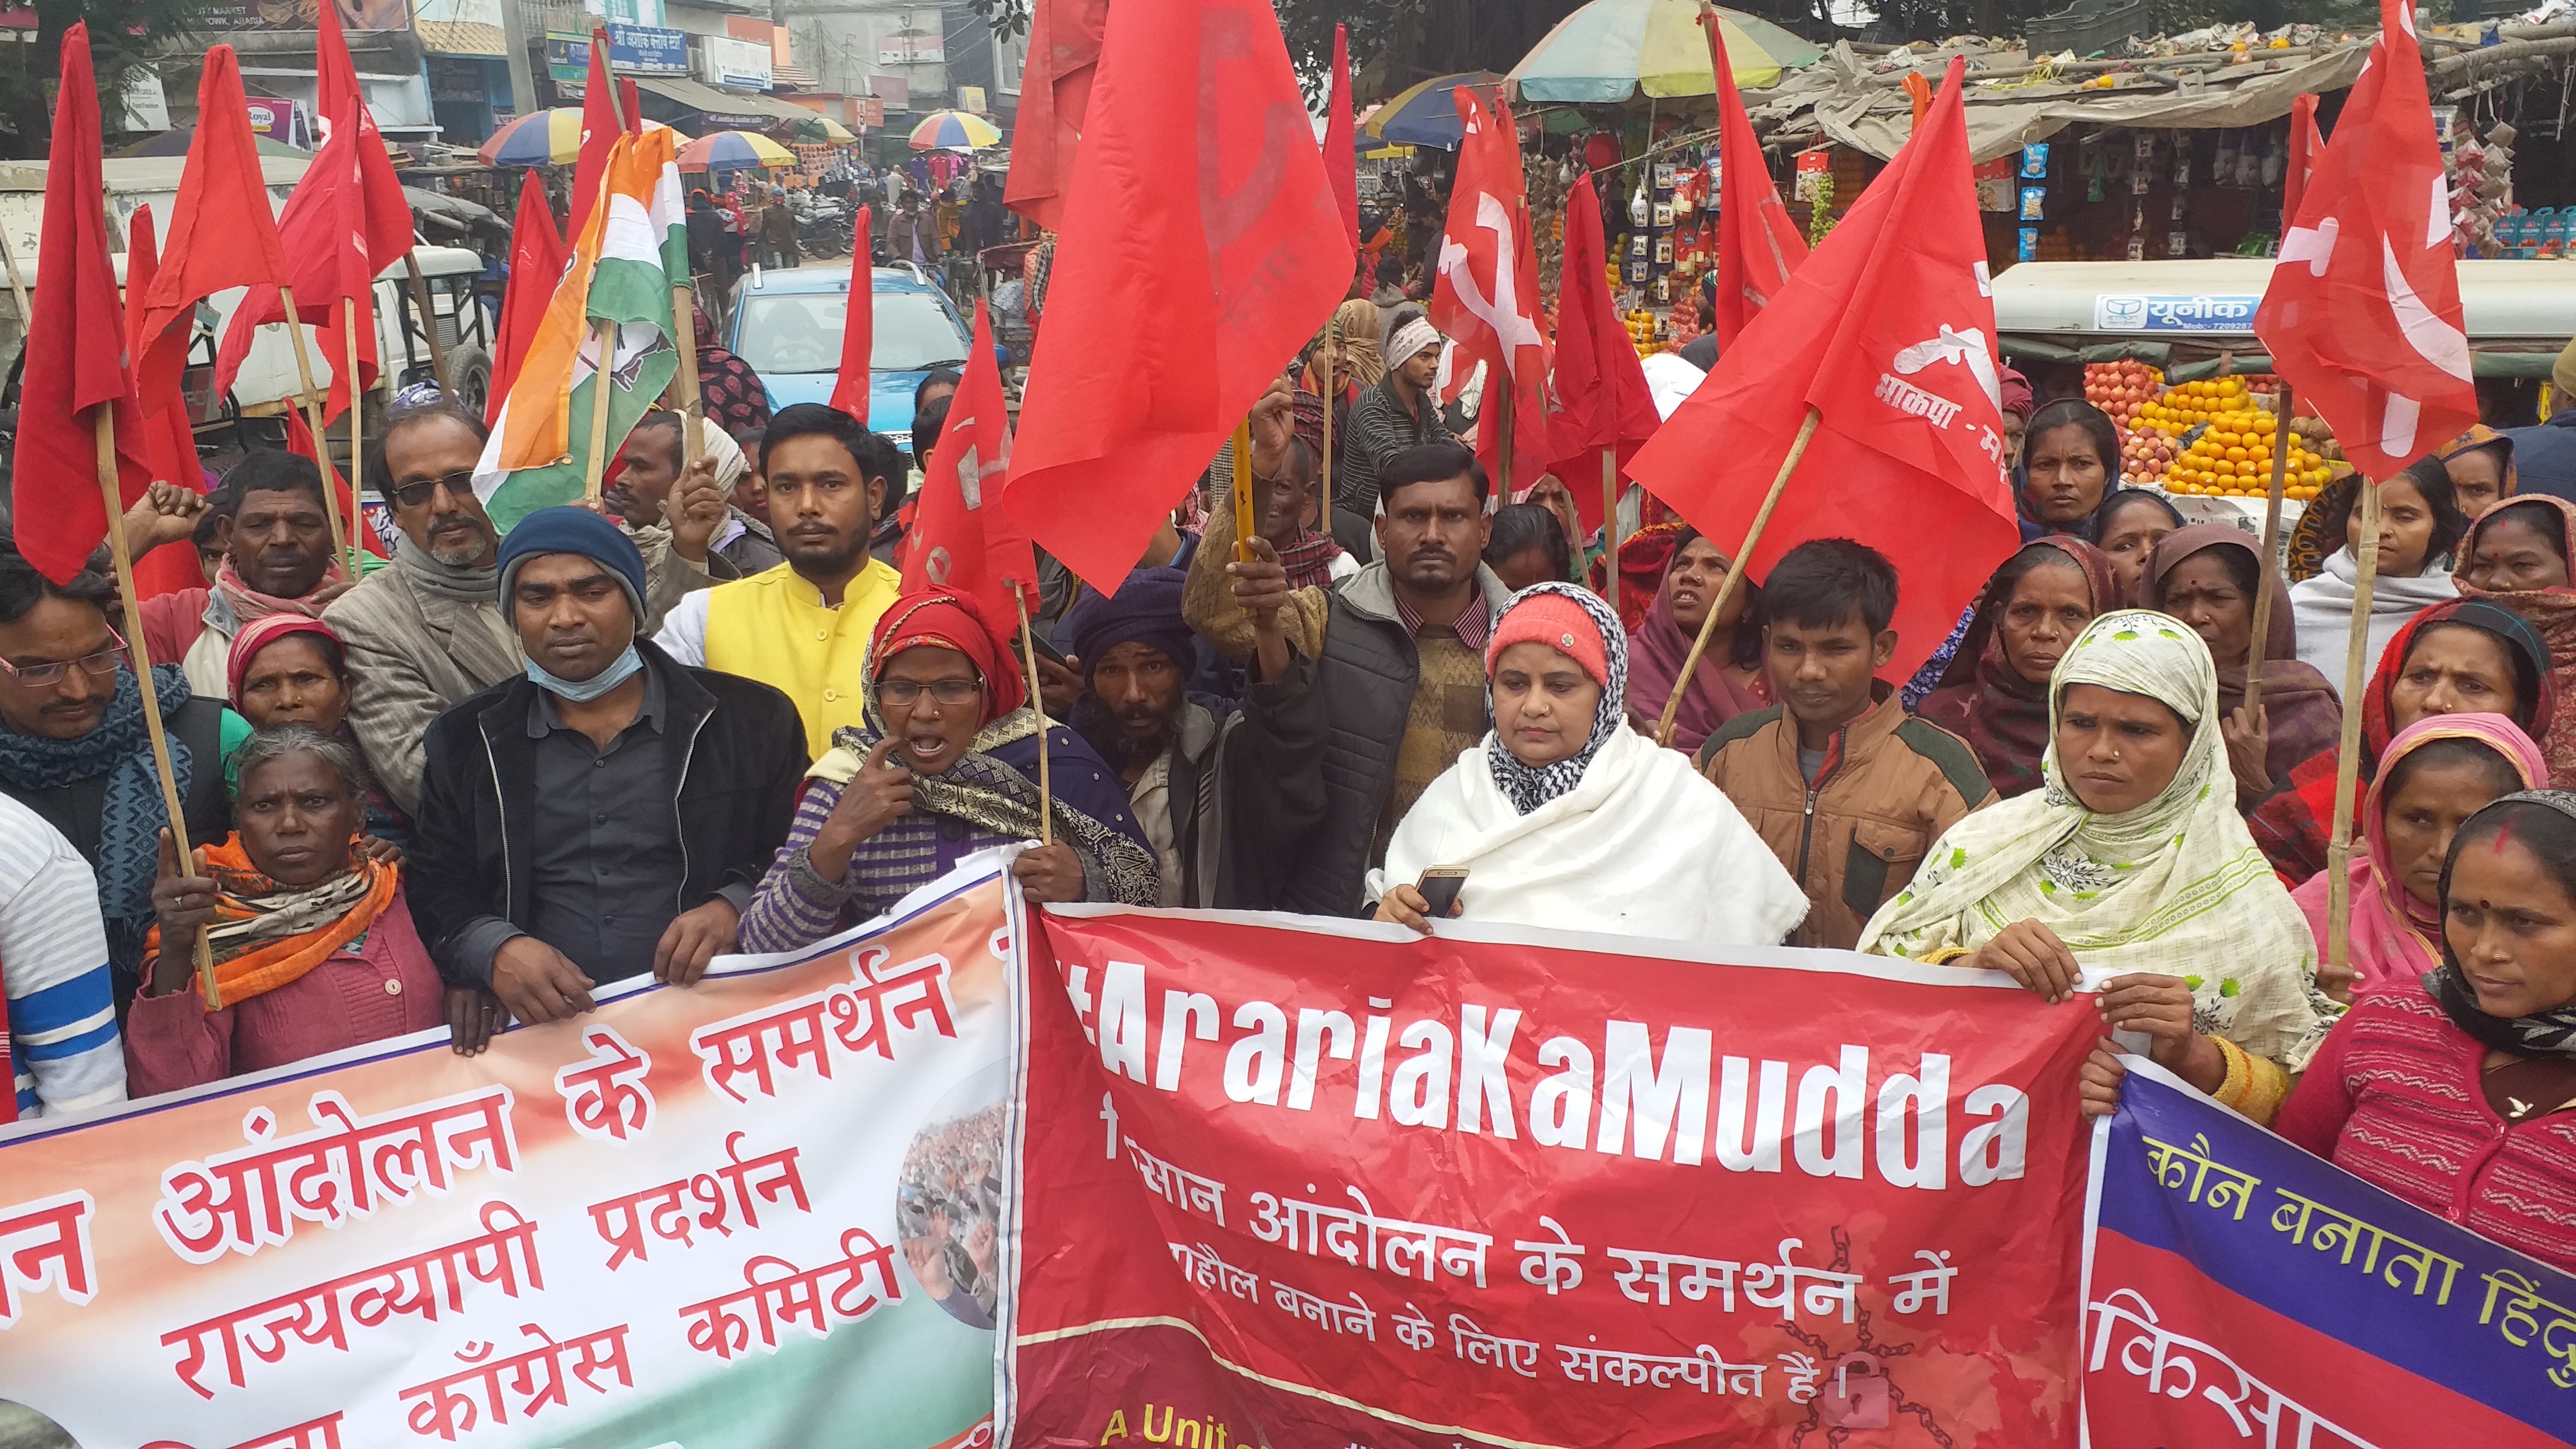 Araria: Farmers and laborers took to the streets in support of the peasant movement